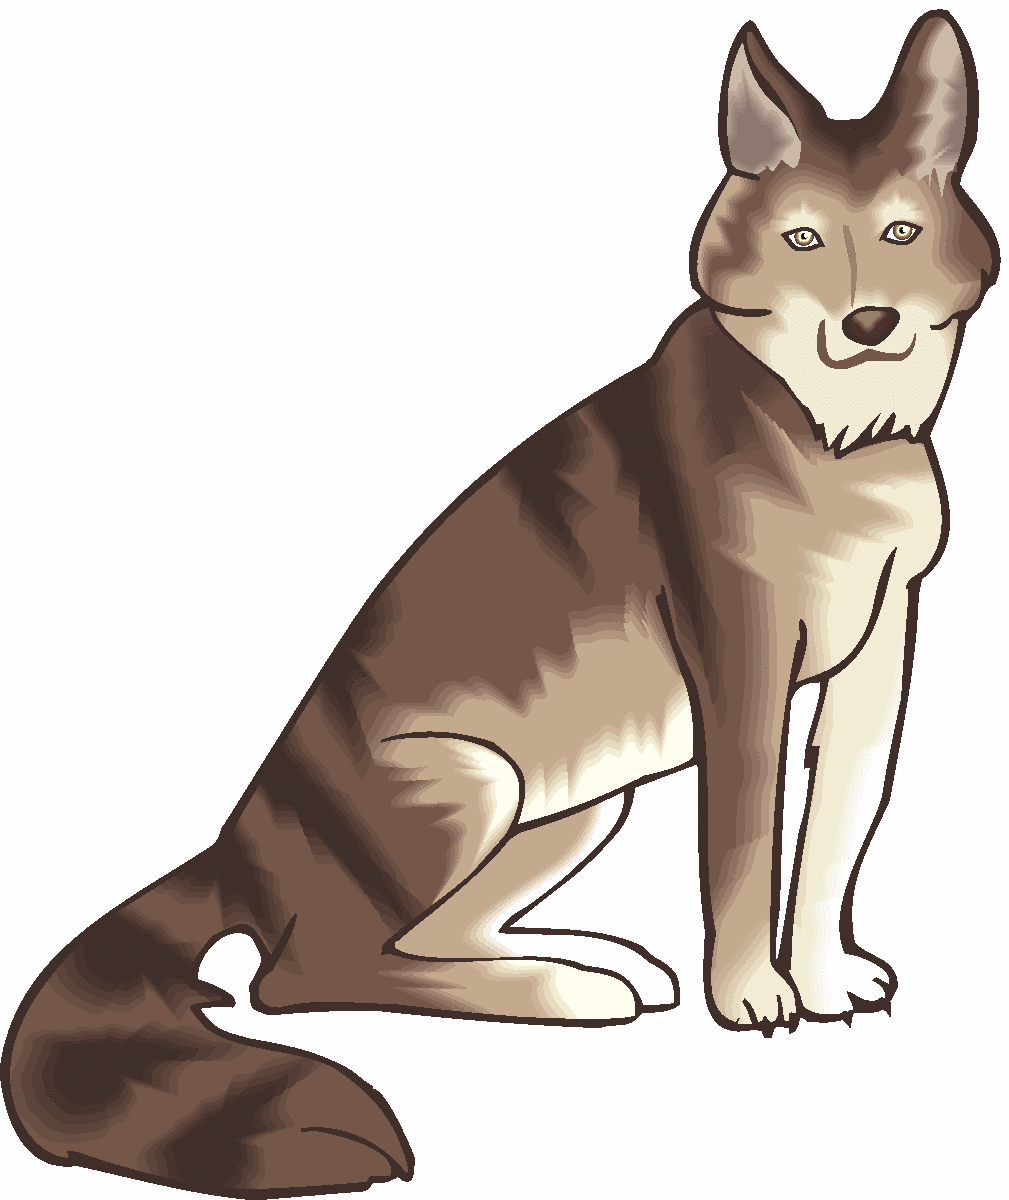 Free Coyote Clipart